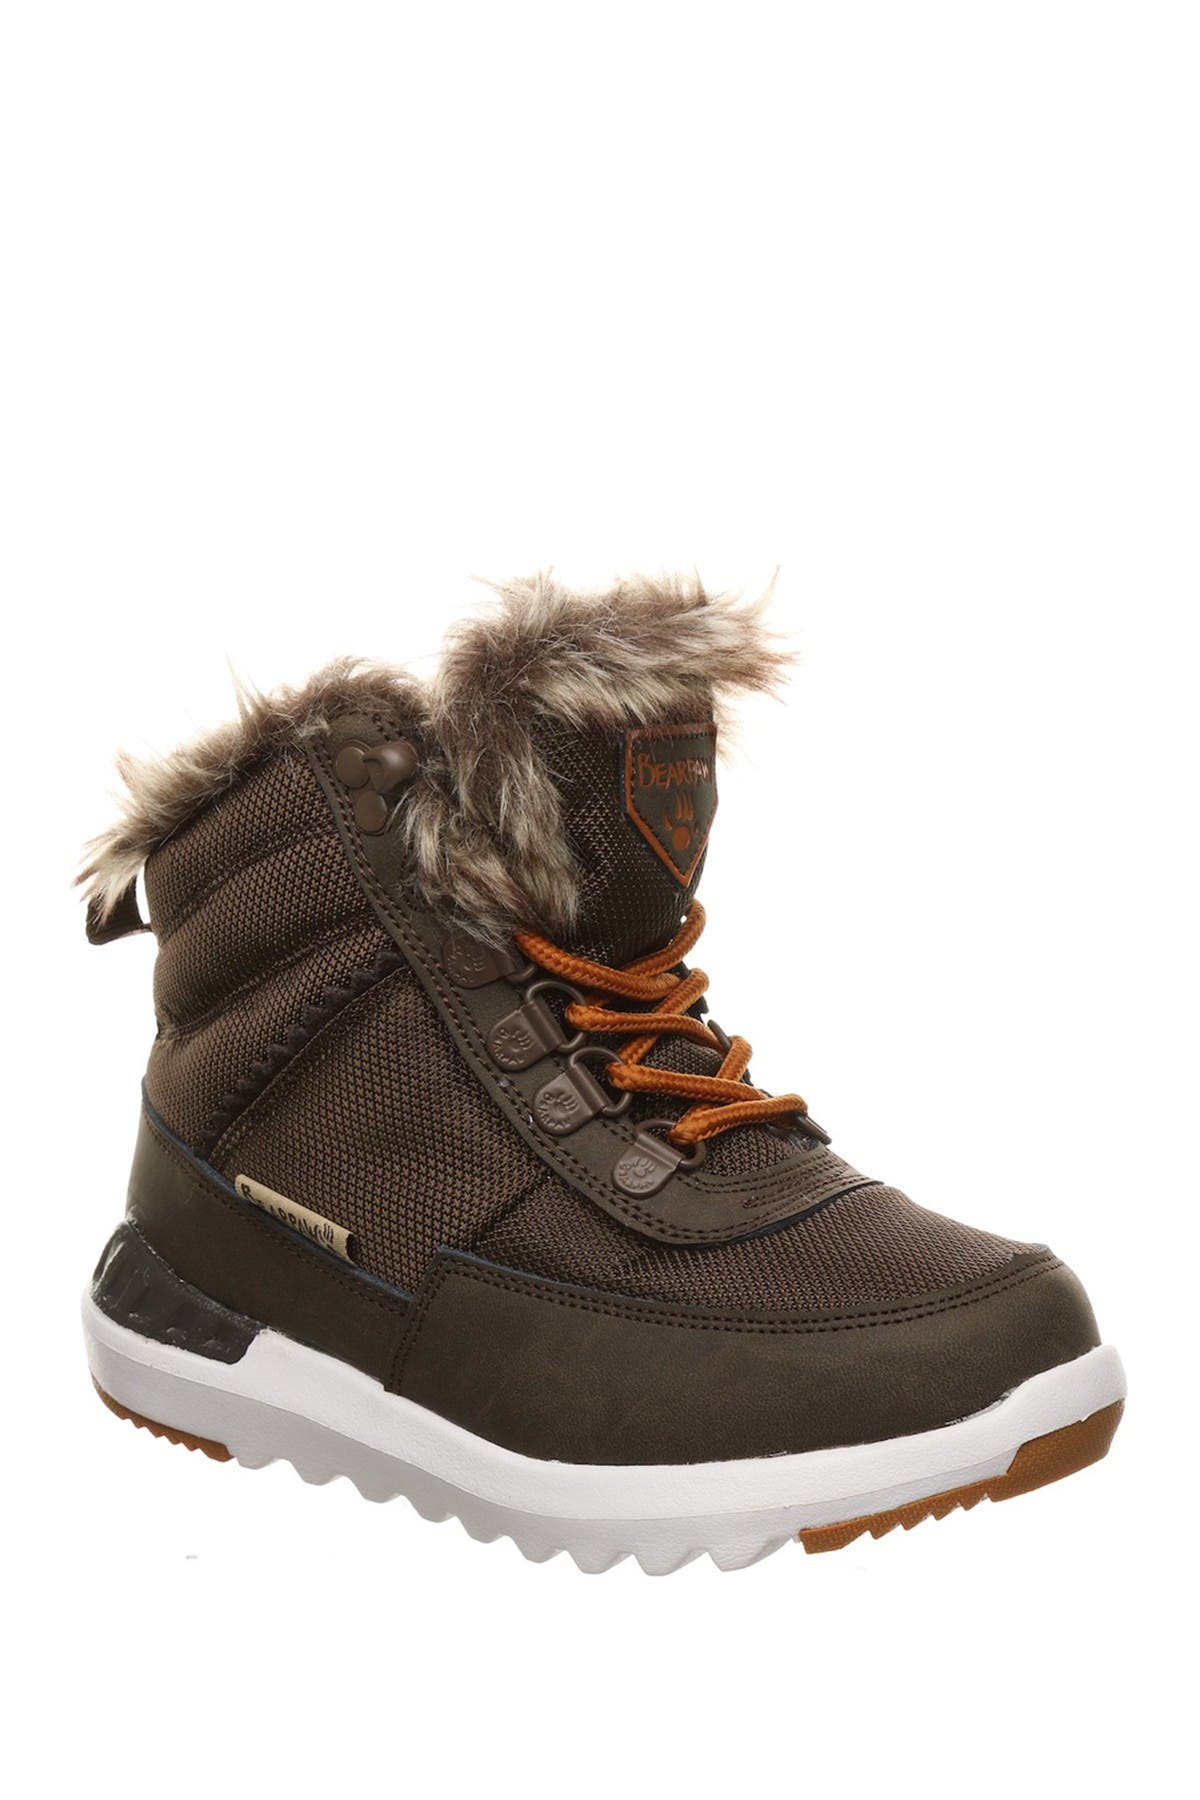 hiking boots with fur lining